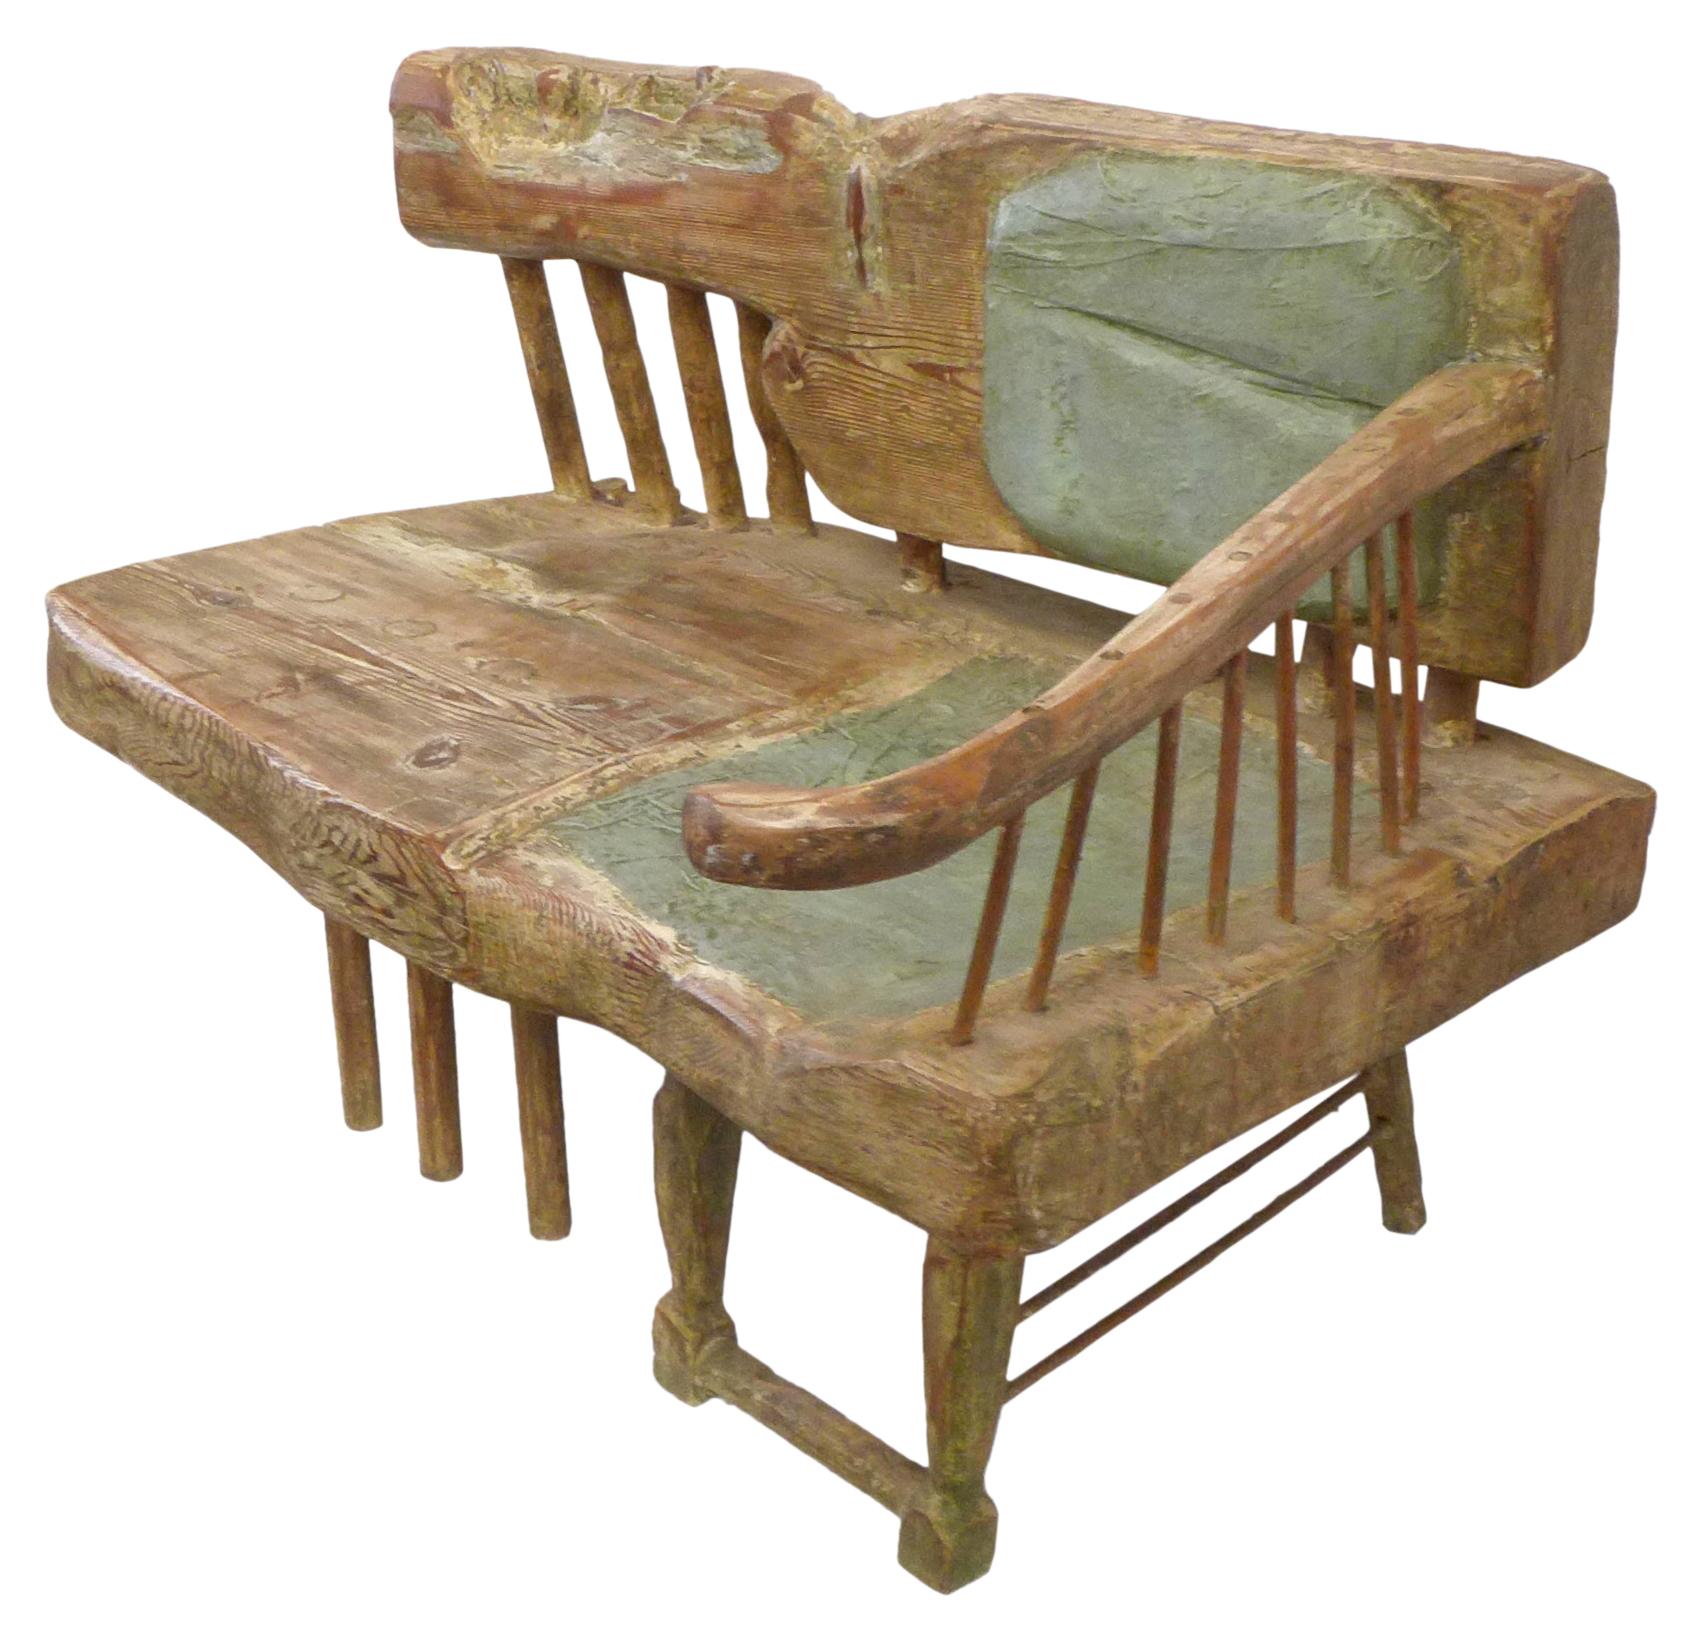 A wonderful and unique California craft, fantasy furniture wood settee. An incredible art-furniture concept; a creative assemblage of a mix of raw and sculpted wood fragments. A curious and alluring form in an unusually petite scale, great from all